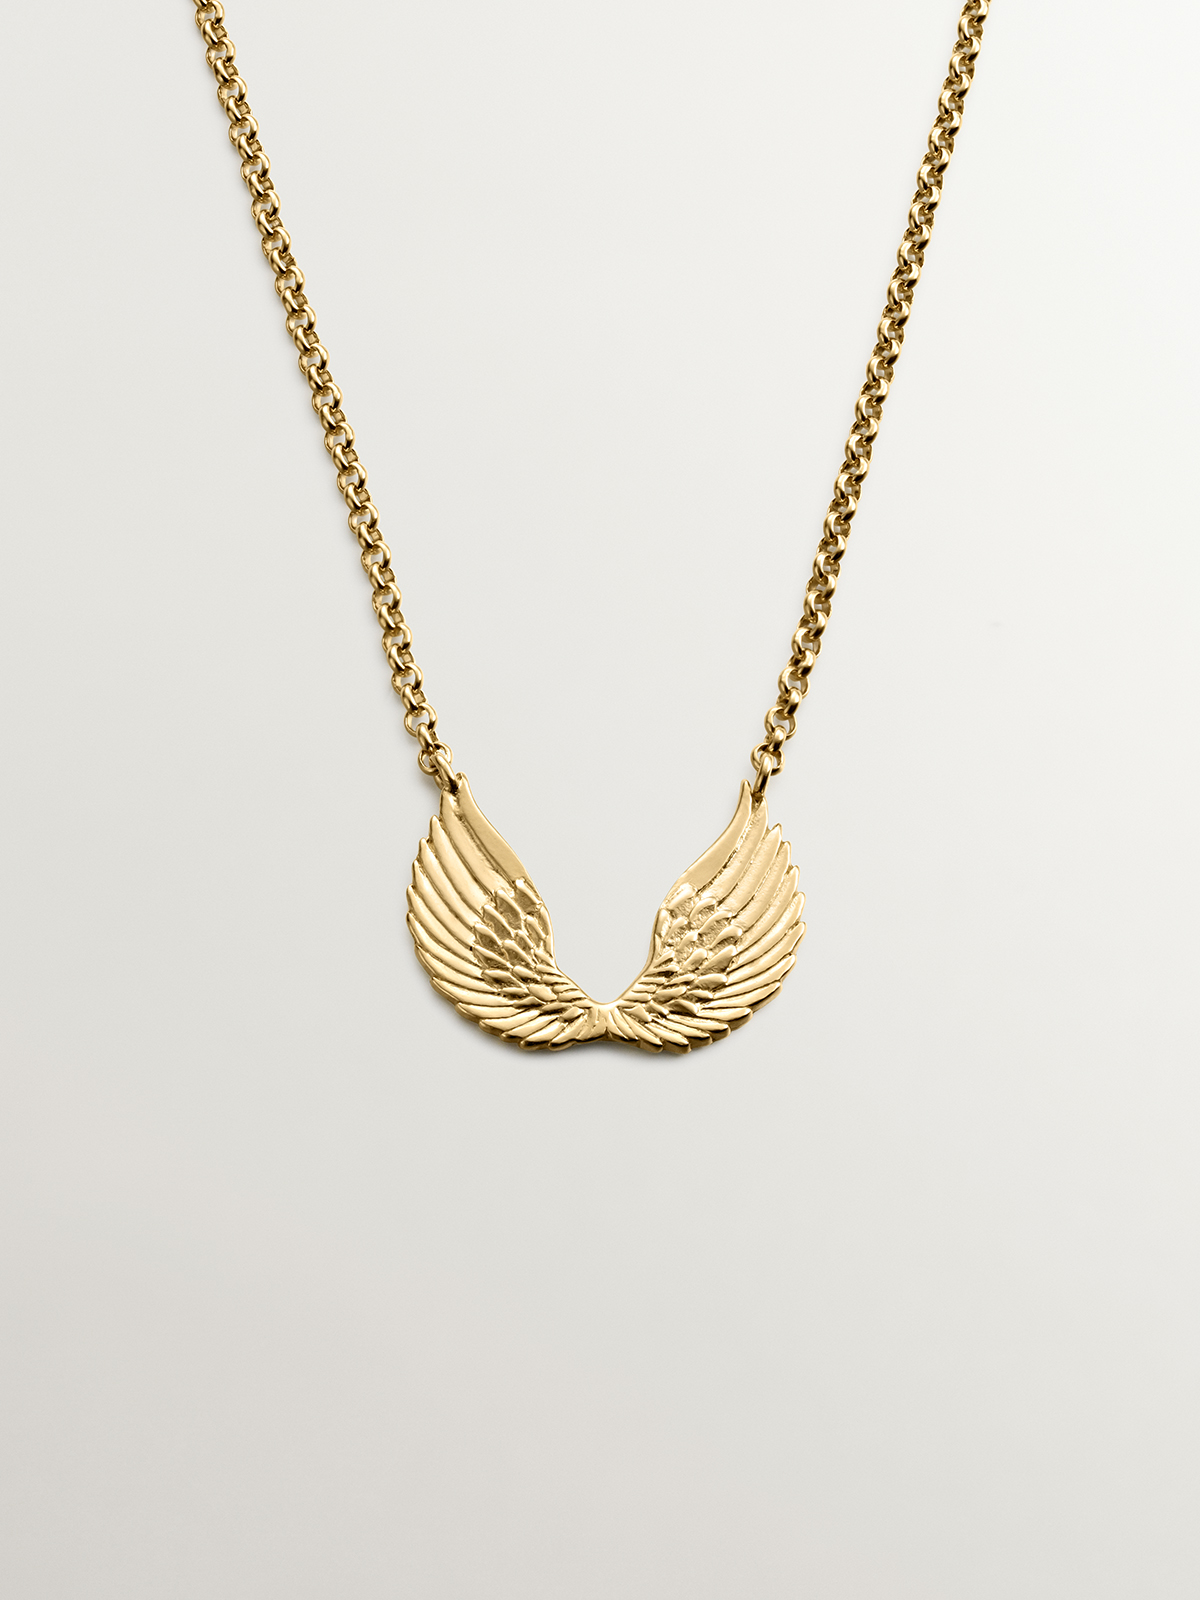 925 silver pendant bathed in 18K yellow gold with wings